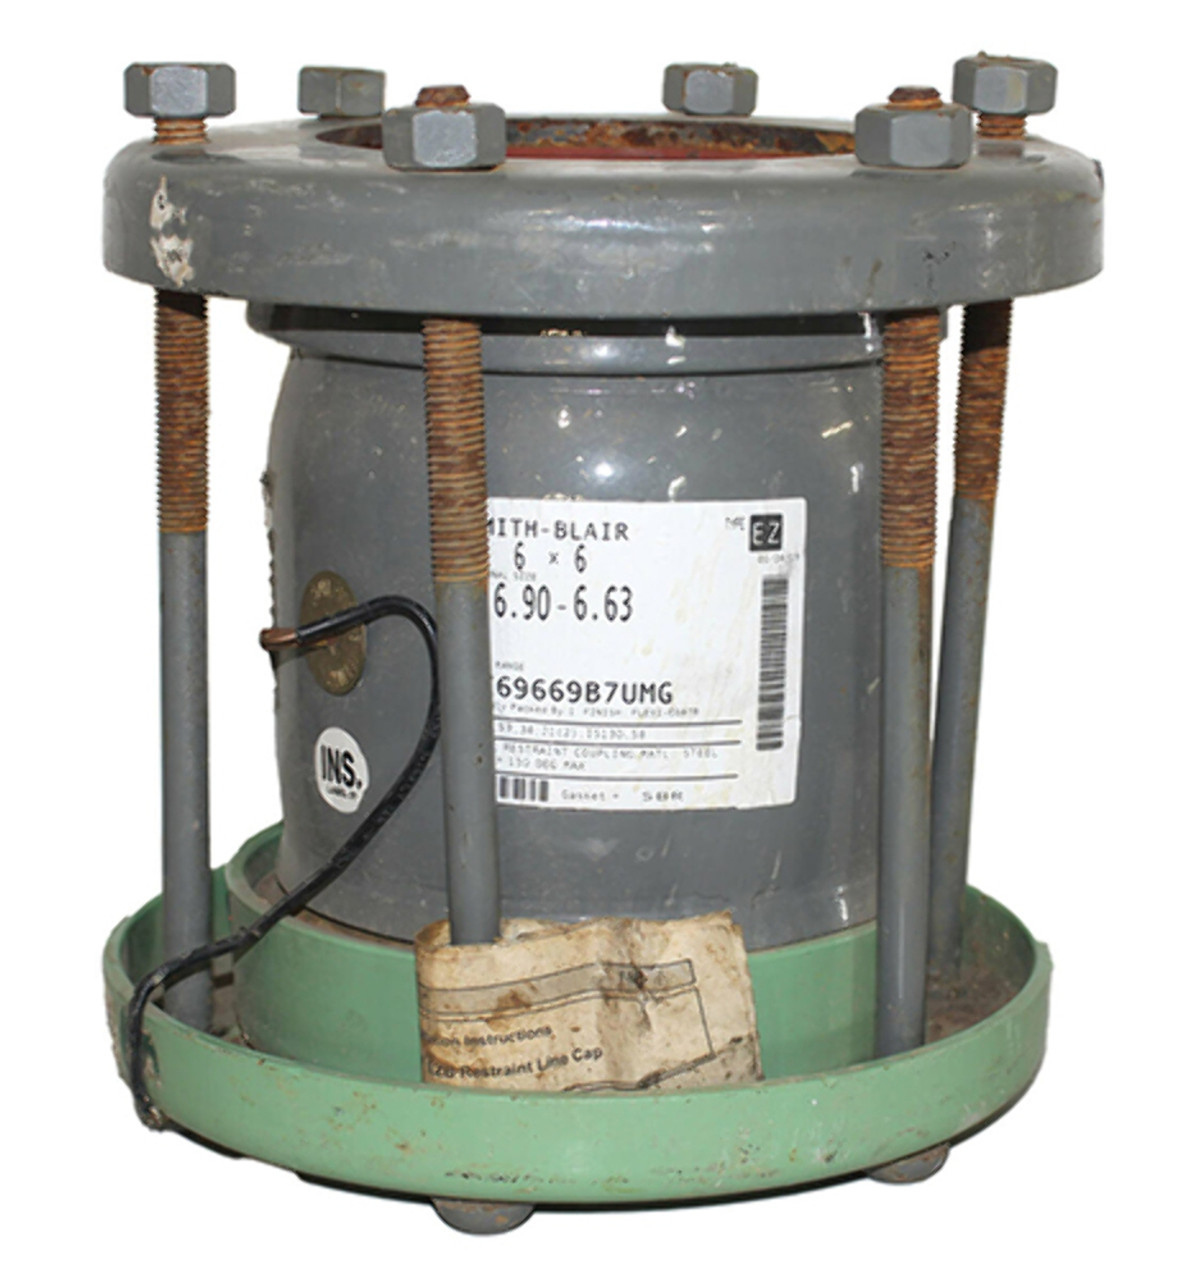 Smith-Blair EZ69669B7UMG 6X6 Insulated Restraint Coupling Nominal Size: 6-9/10 - 6-63/100